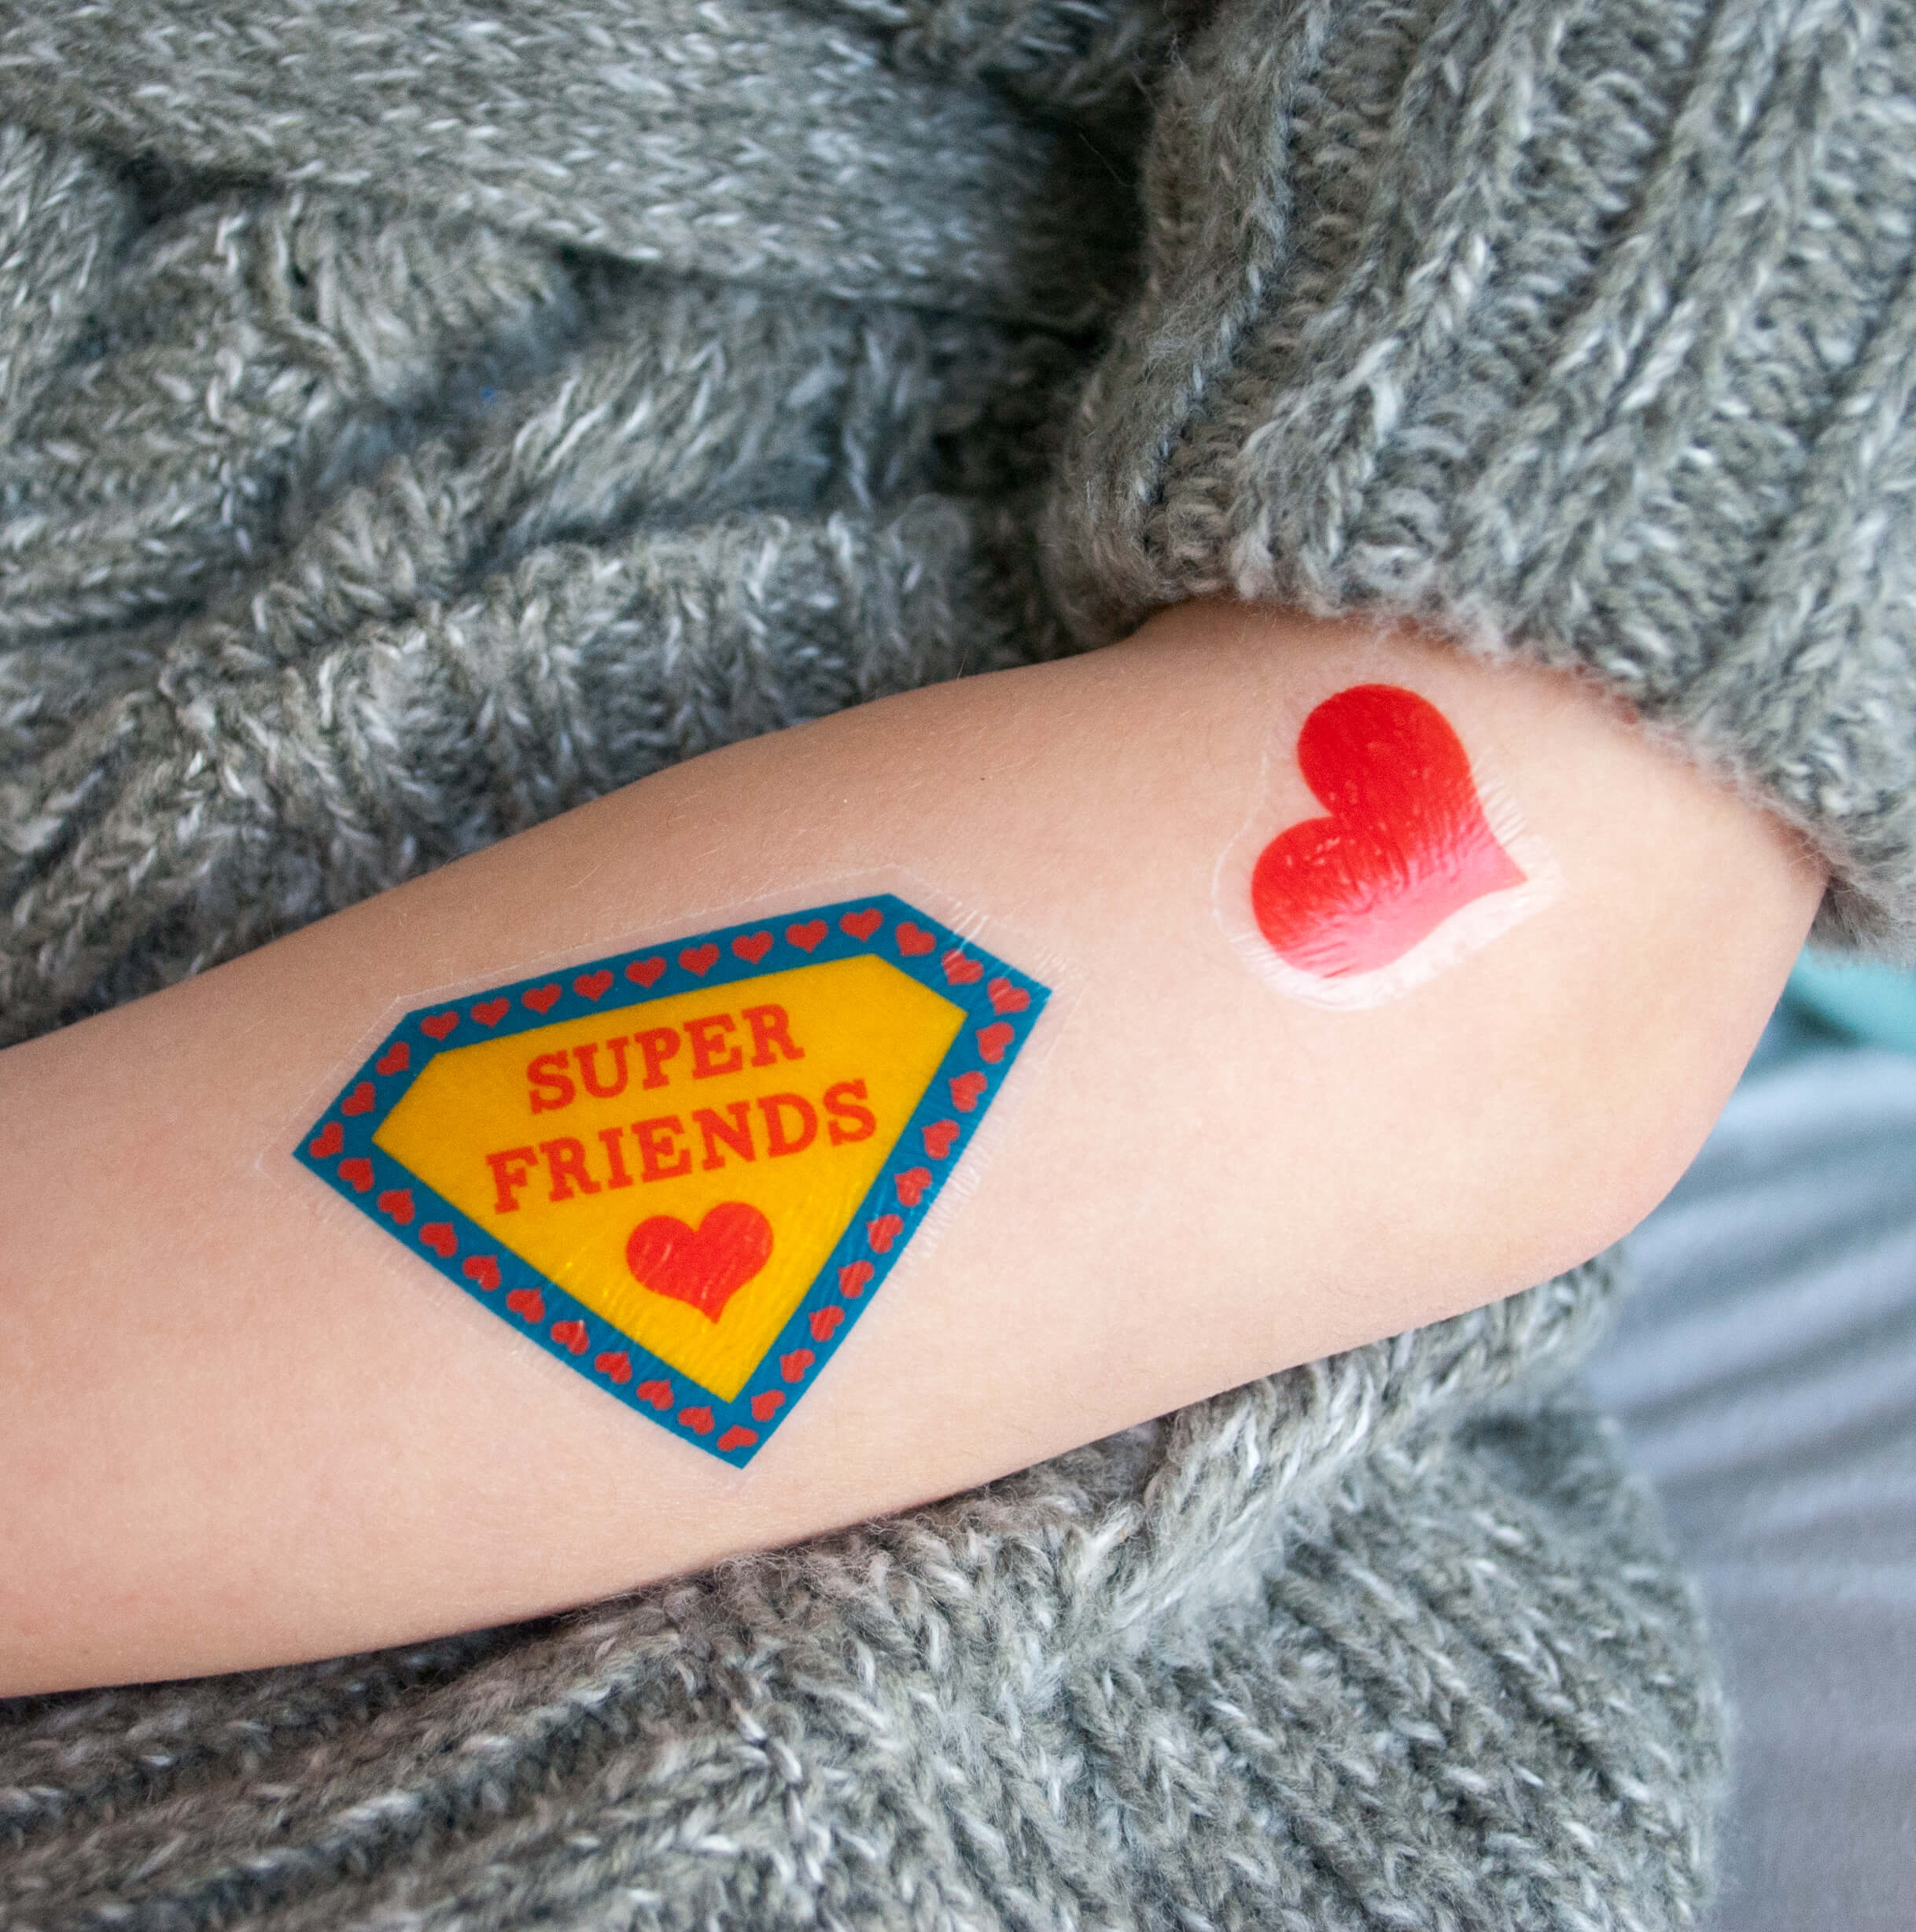 Super Friends printable Super Hero temporary tattoos for Valentine's Day - such a cute #valentine for preschoolers and elementary students #valentinesday #superhero